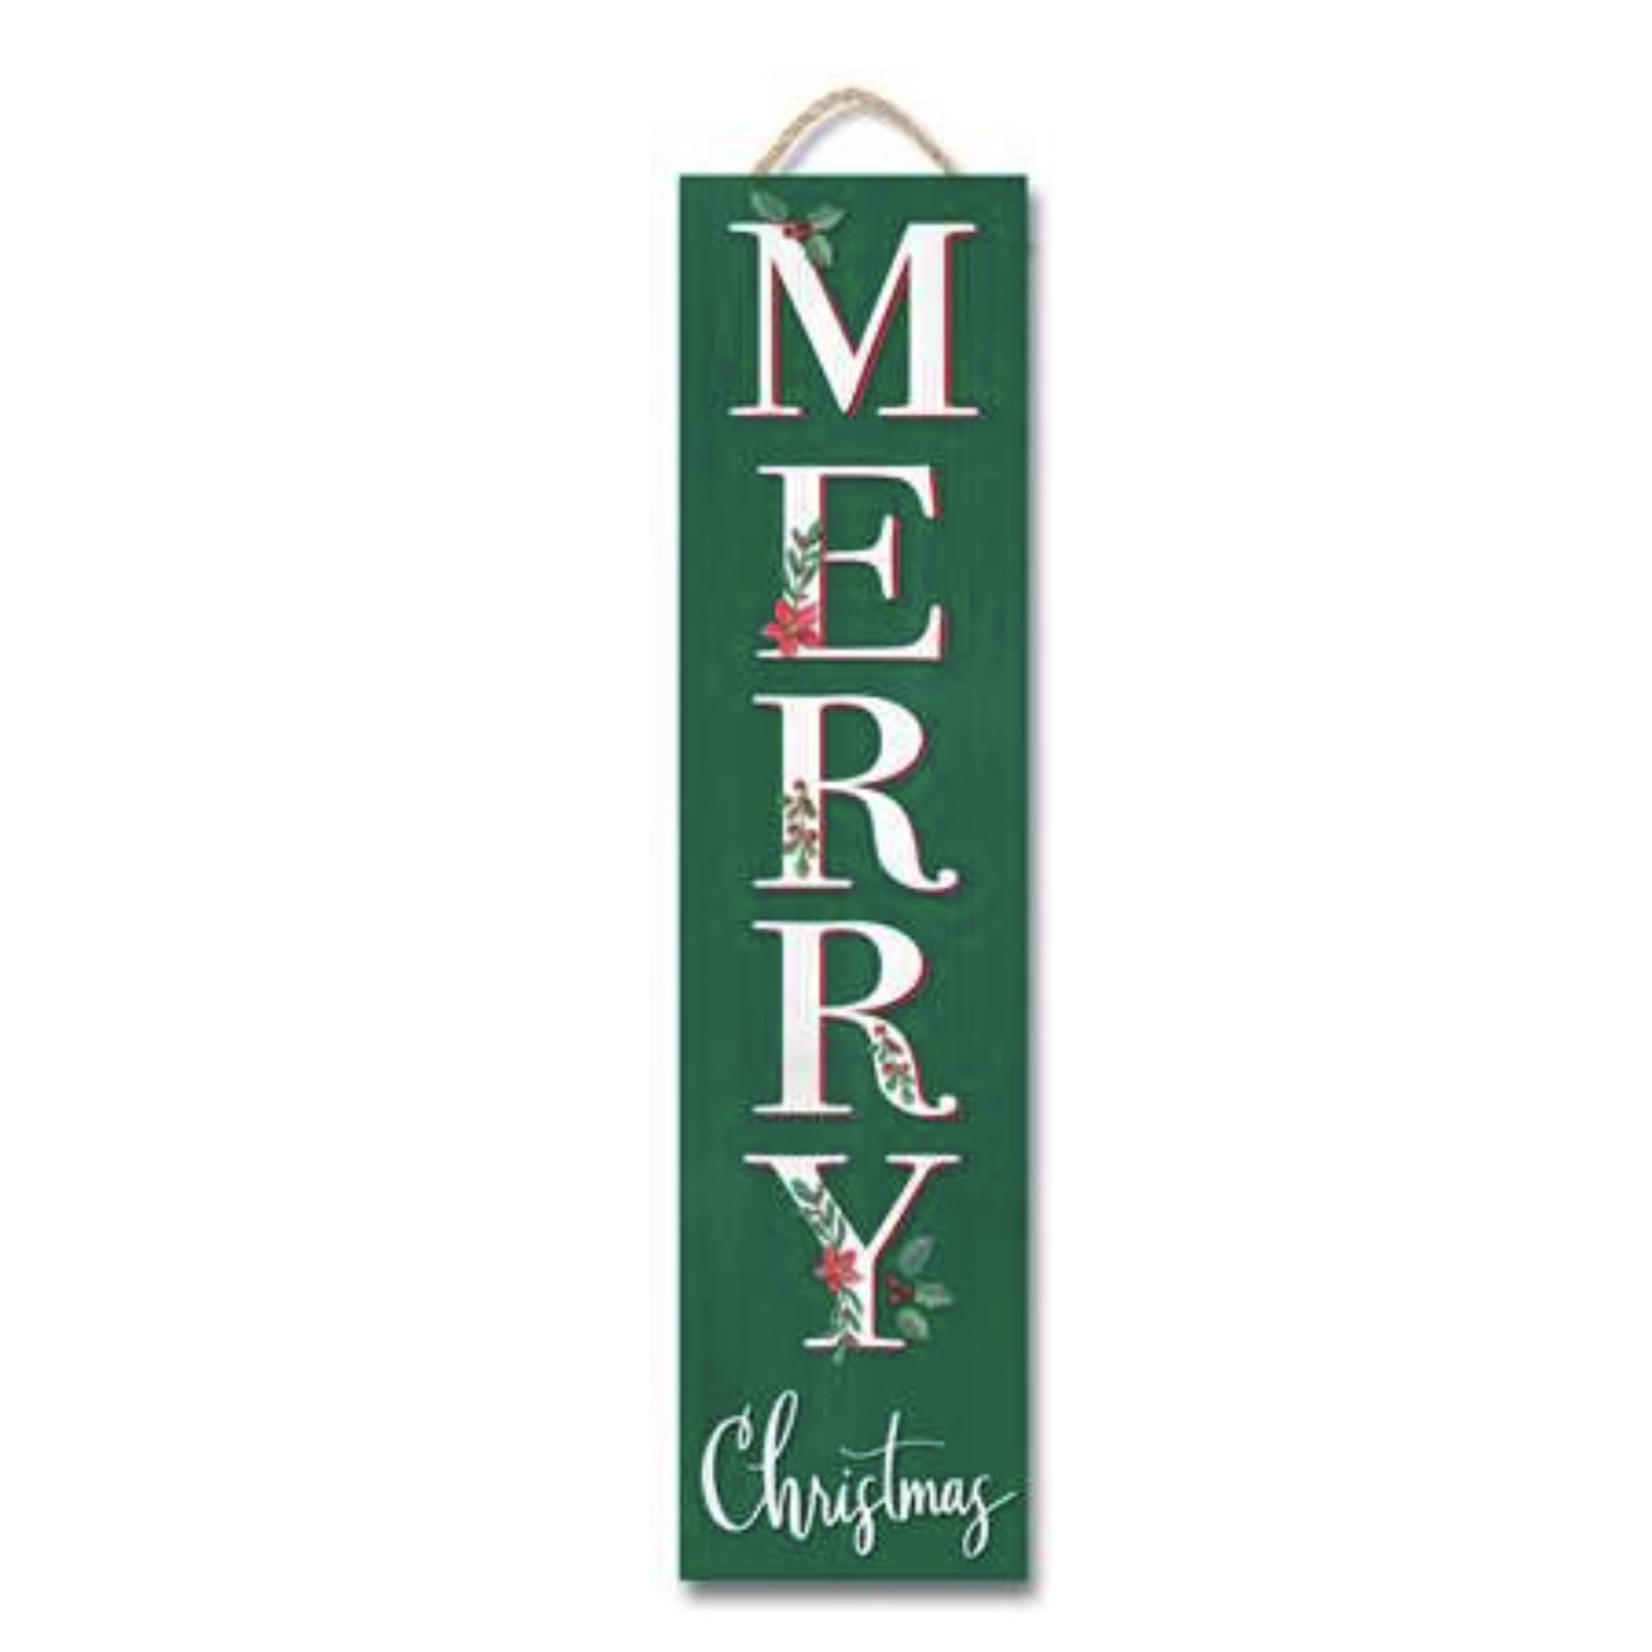 My Word! Merry Christmas Stand Out Tall Porch Sign